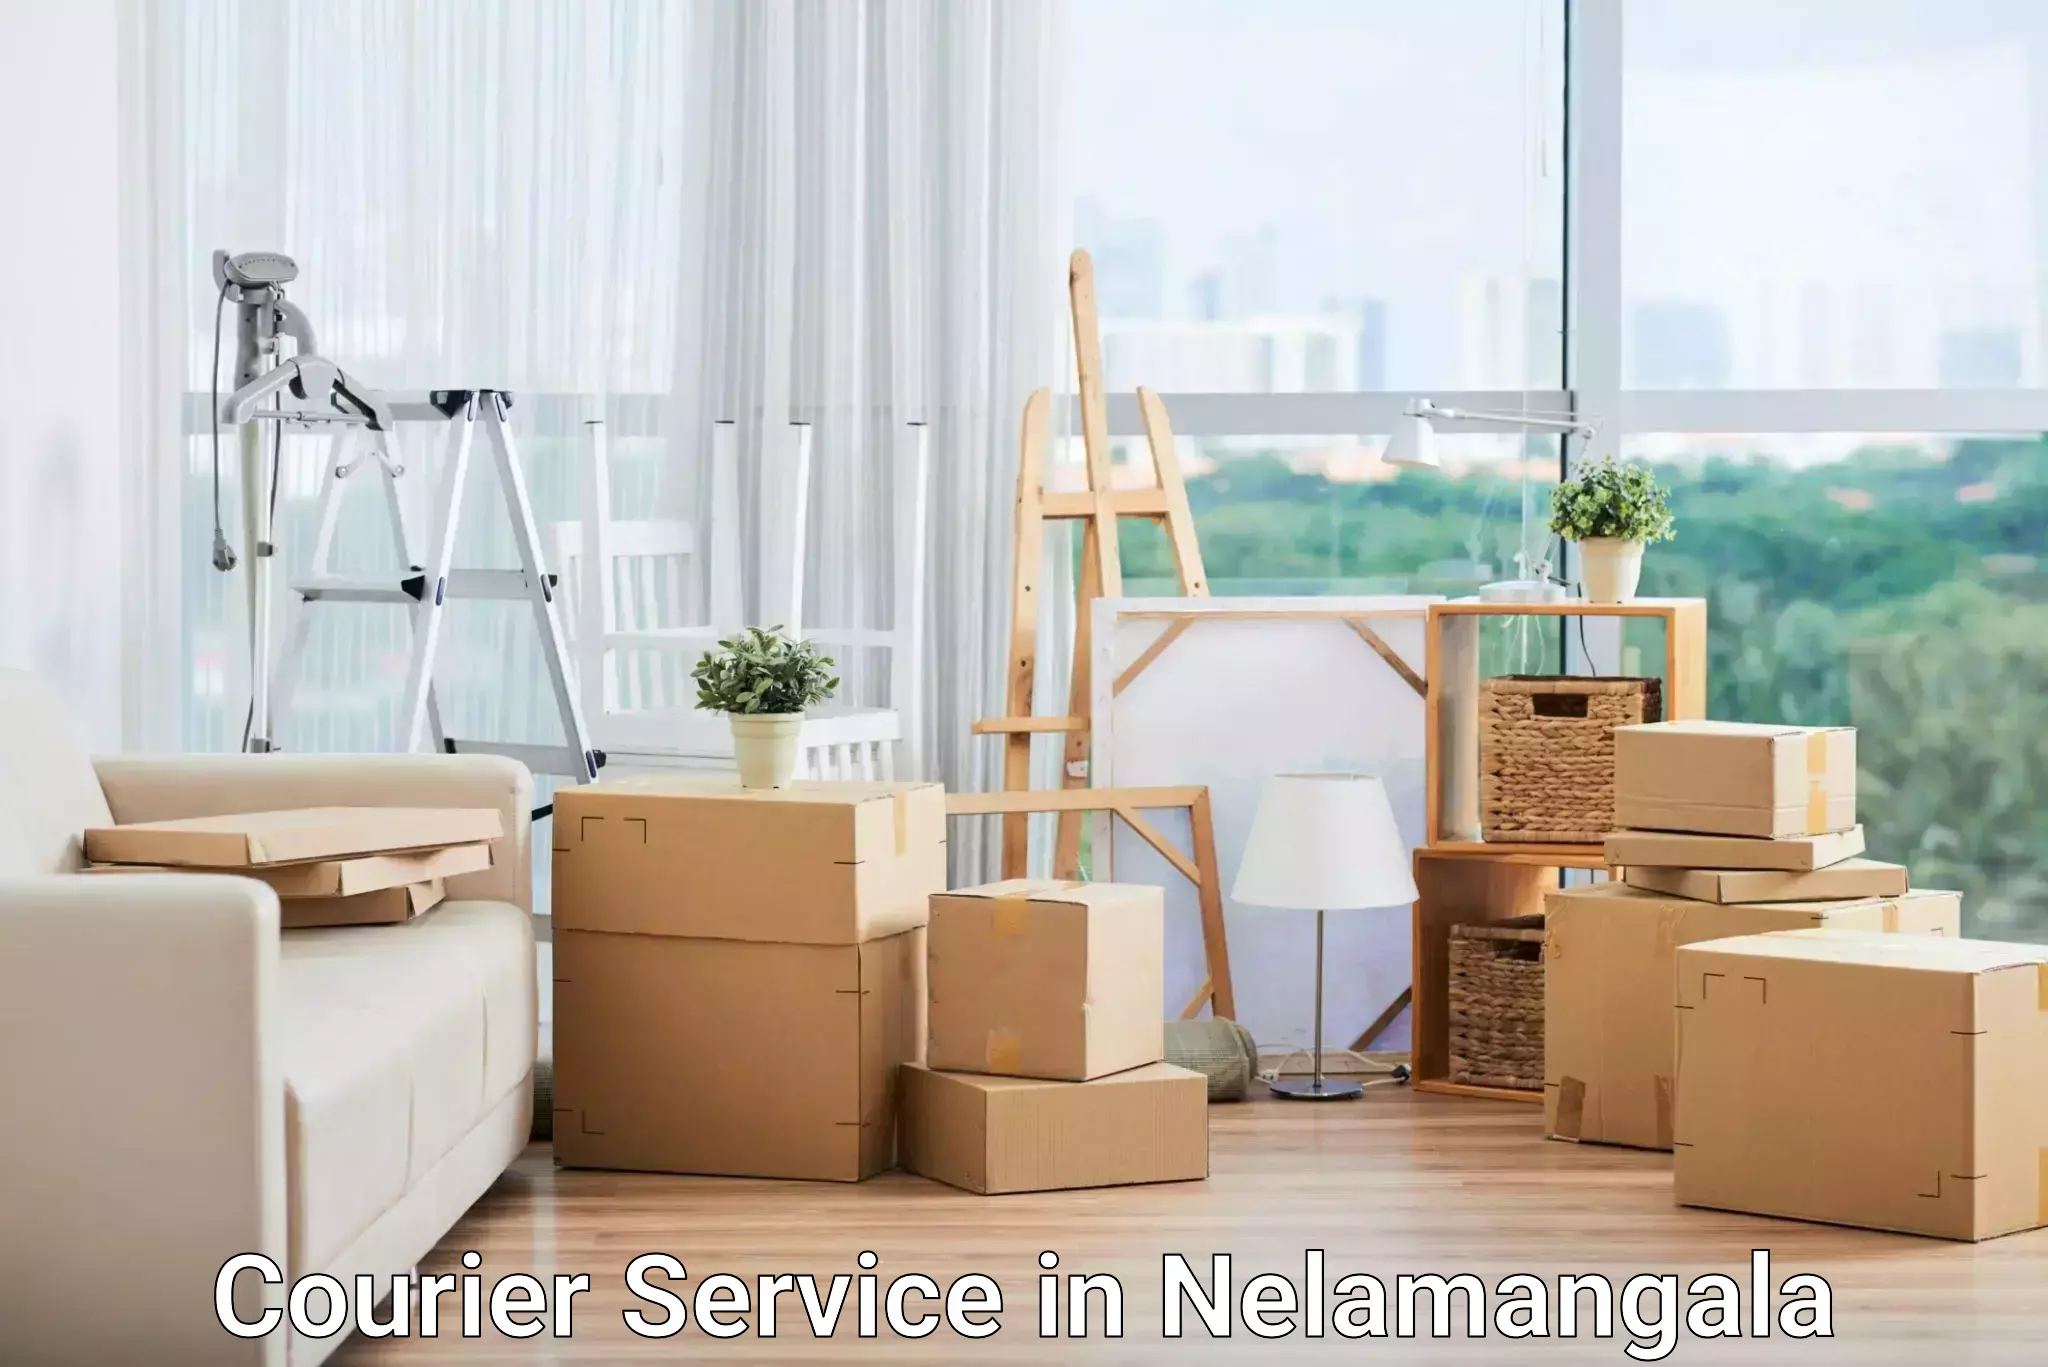 Affordable logistics services in Nelamangala